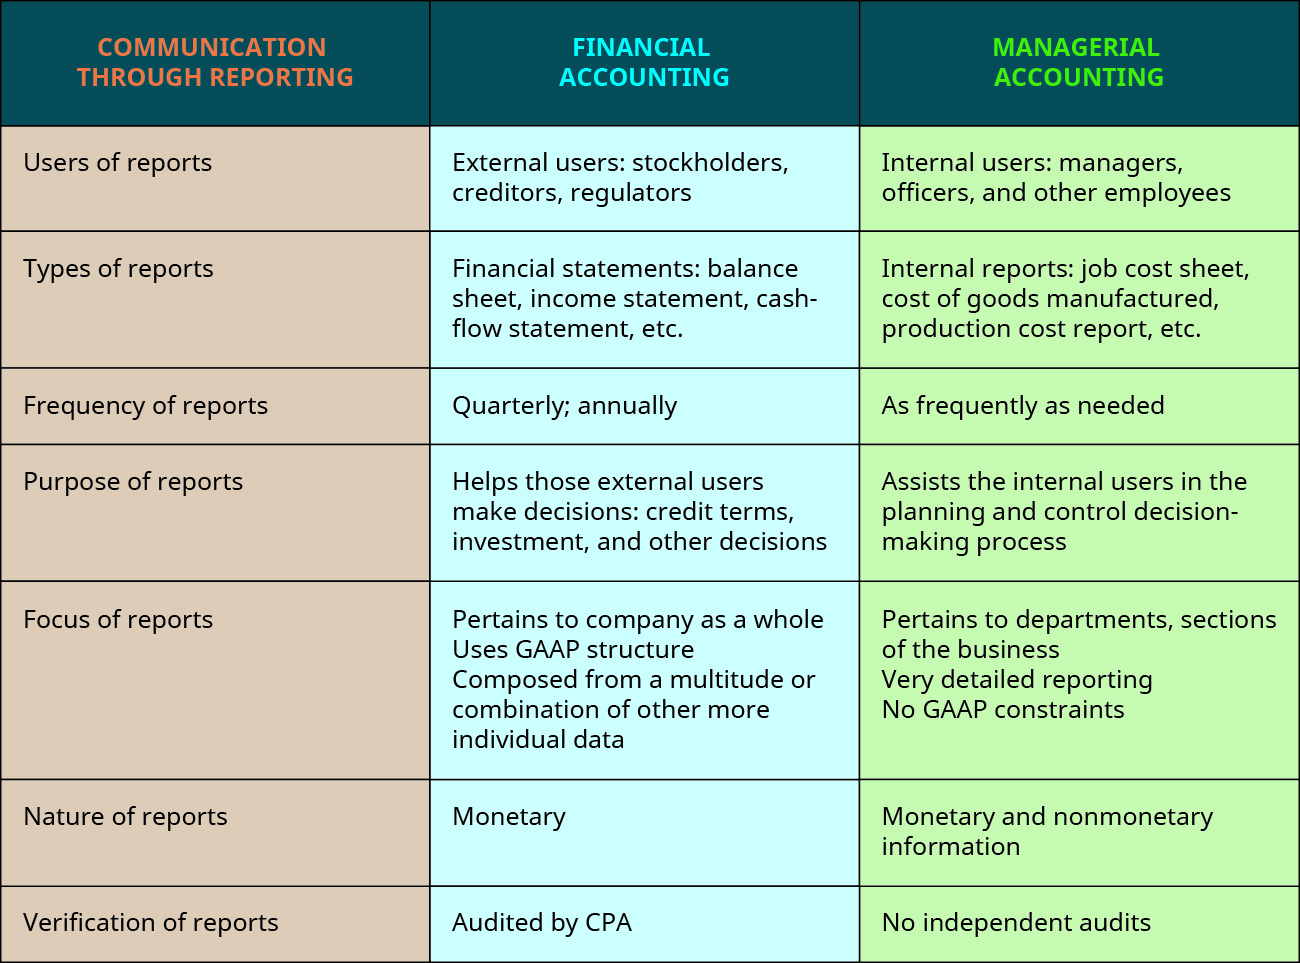 A three-column chart shows the headings Communication through Reporting, Financial Accounting, and Managerial Accounting. The rows are as follows: users of reports; external users: stockholders, creditors, regulators; internal users: managers, officers, and other employees. Types of reports; financial statements: balance sheet, income statement, cash-flow statement, etc.; internal reports: job cost sheet, cost of goods manufactured, production cost report, etc. Frequency of reports; quarterly, annually; as frequently as needed. Purpose of reports; helps those external users make decisions: credit terms, investment, and other decisions; assists the internal users in the planning and control decision-making process. Focus of reports; pertains to company as a whole, uses GAAP structure, composed from a multitude or combination of other more individual data; pertains to departments, sections of the business, very detailed reporting, no GAAP constraints. Nature of reports; monetary; monetary and nonmonetary information. Verification of reports; audited by CPA; no independent audits.